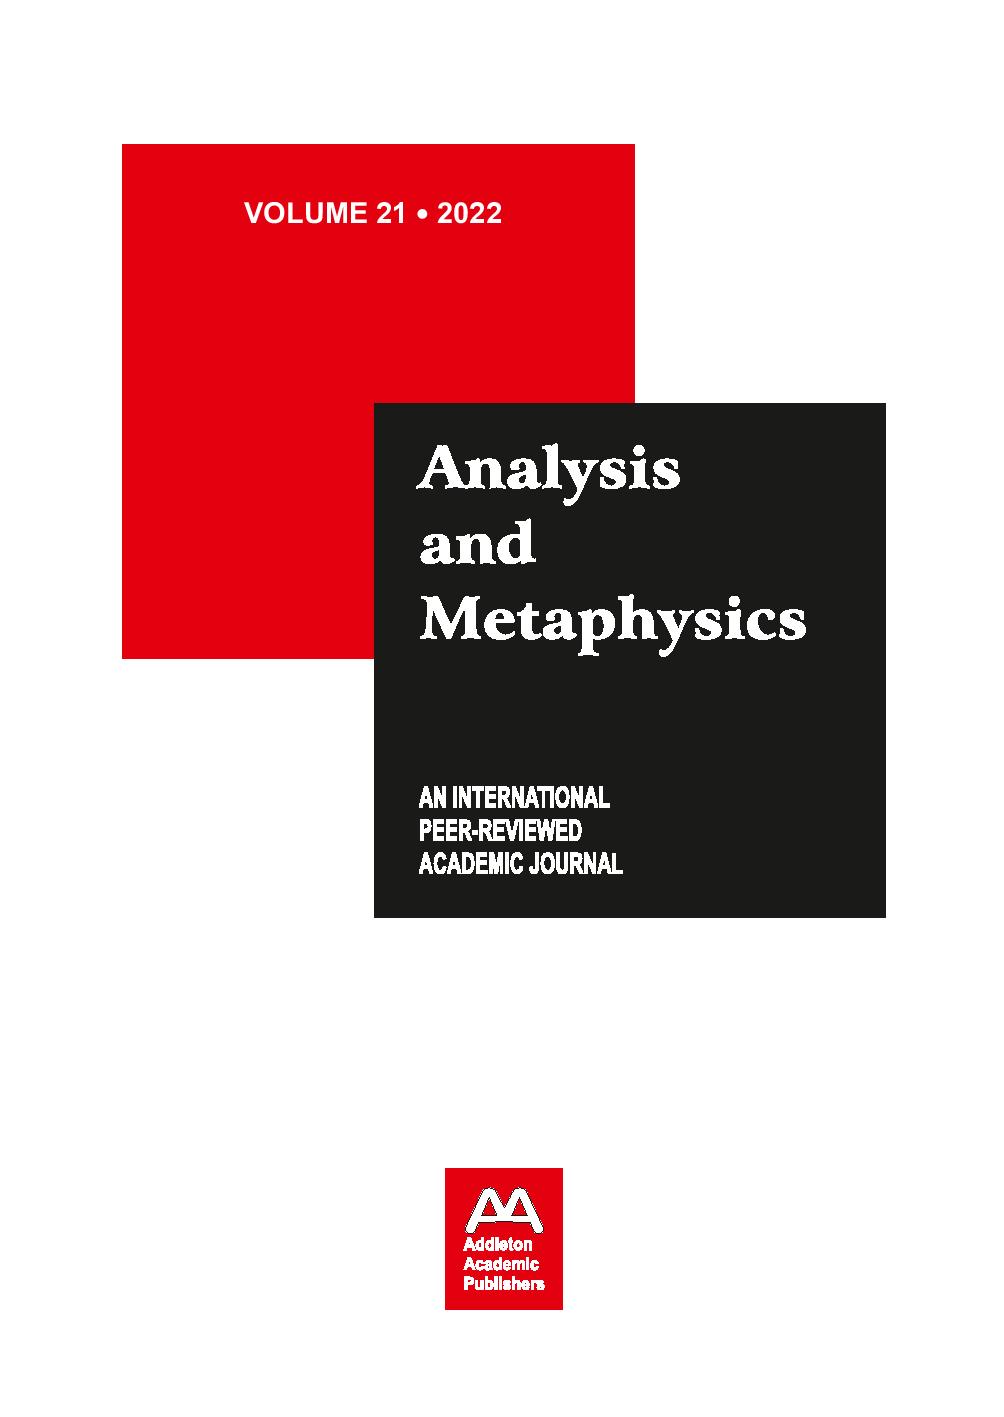 Virtual Navigation and Augmented Reality Shopping Tools, Immersive and Cognitive Technologies, and Image Processing Computational and Object Tracking Algorithms in the Metaverse Commerce Cover Image